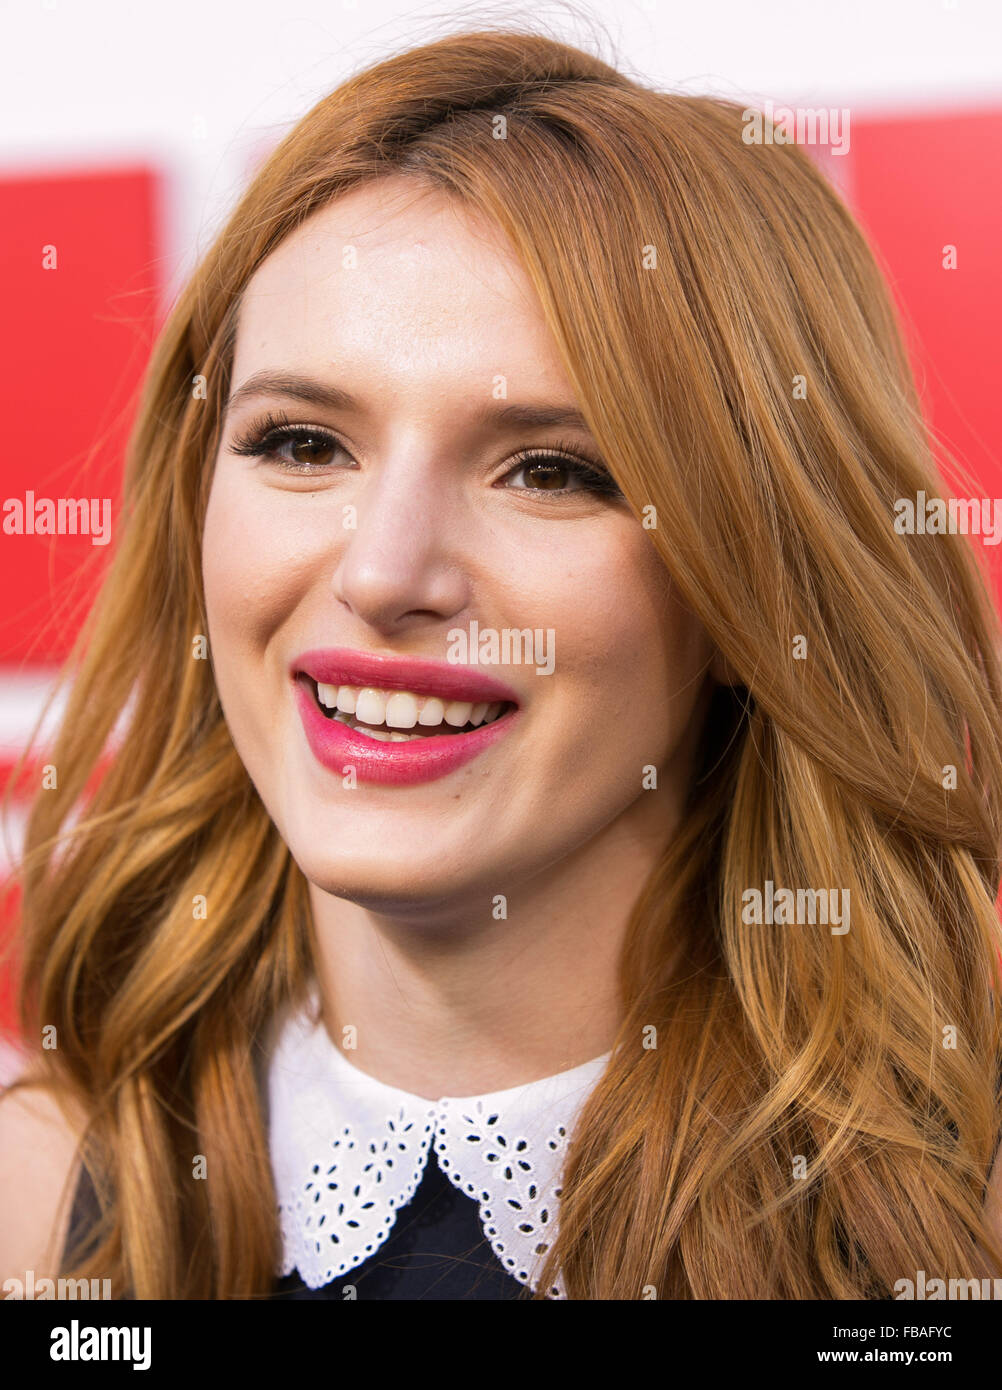 'Alvin and the Chipmunks: The Road Chip' premiere at the Darryl F. Zanuck Theatre  Featuring: Bella Thorne Where: Los Angeles, California, United States When: 12 Dec 2015 Stock Photo